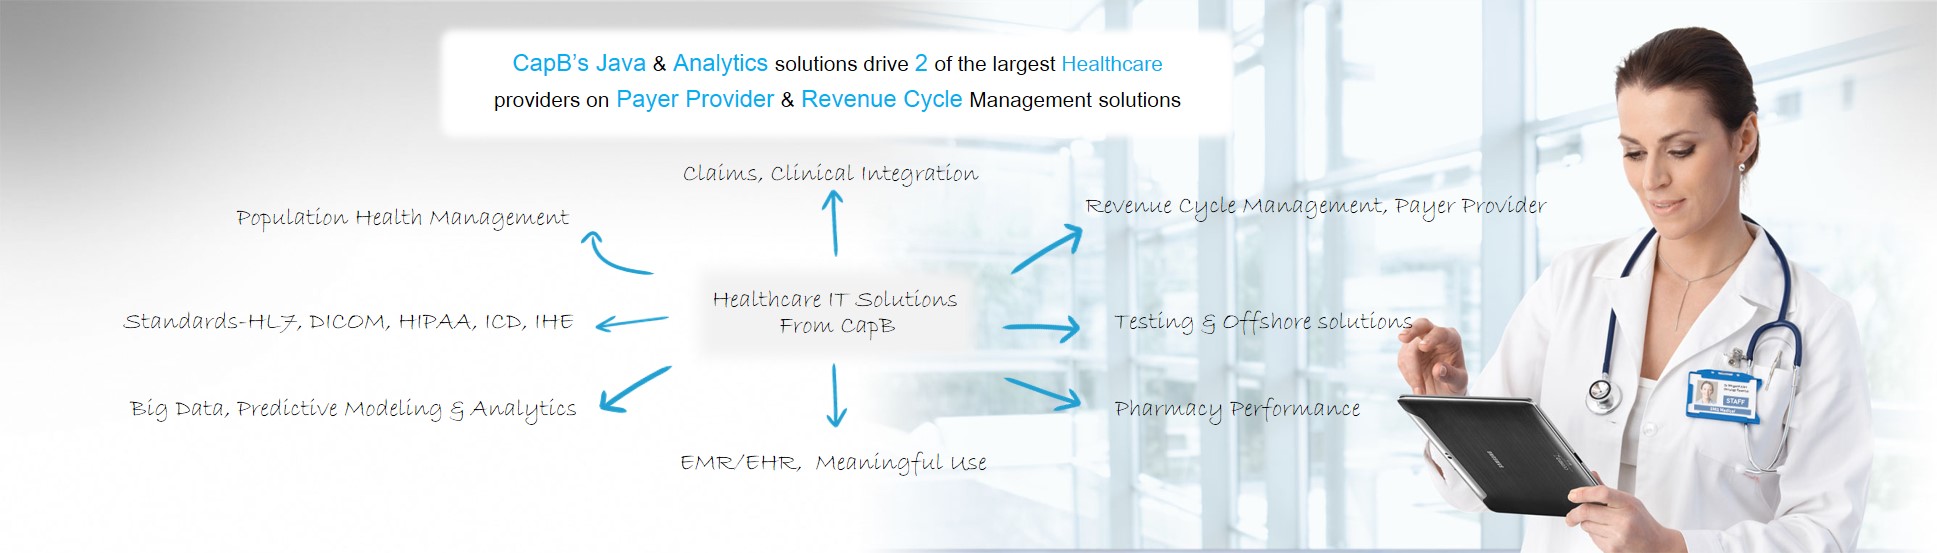 CAPB-HEALTHCARE-PAYER-PROVIDER-REVENUCE-CYCLE-MANAGEMNET-CLIAMS-EMR-EHR-MEANINGFUL-USE-CLINICAL-INTEGRTAION-PREDICTIVE-MODELING-ANALYTICS-HL7-HIPPA-ICD-POPULATION-HELATH-TESTING-OFFSHORE1